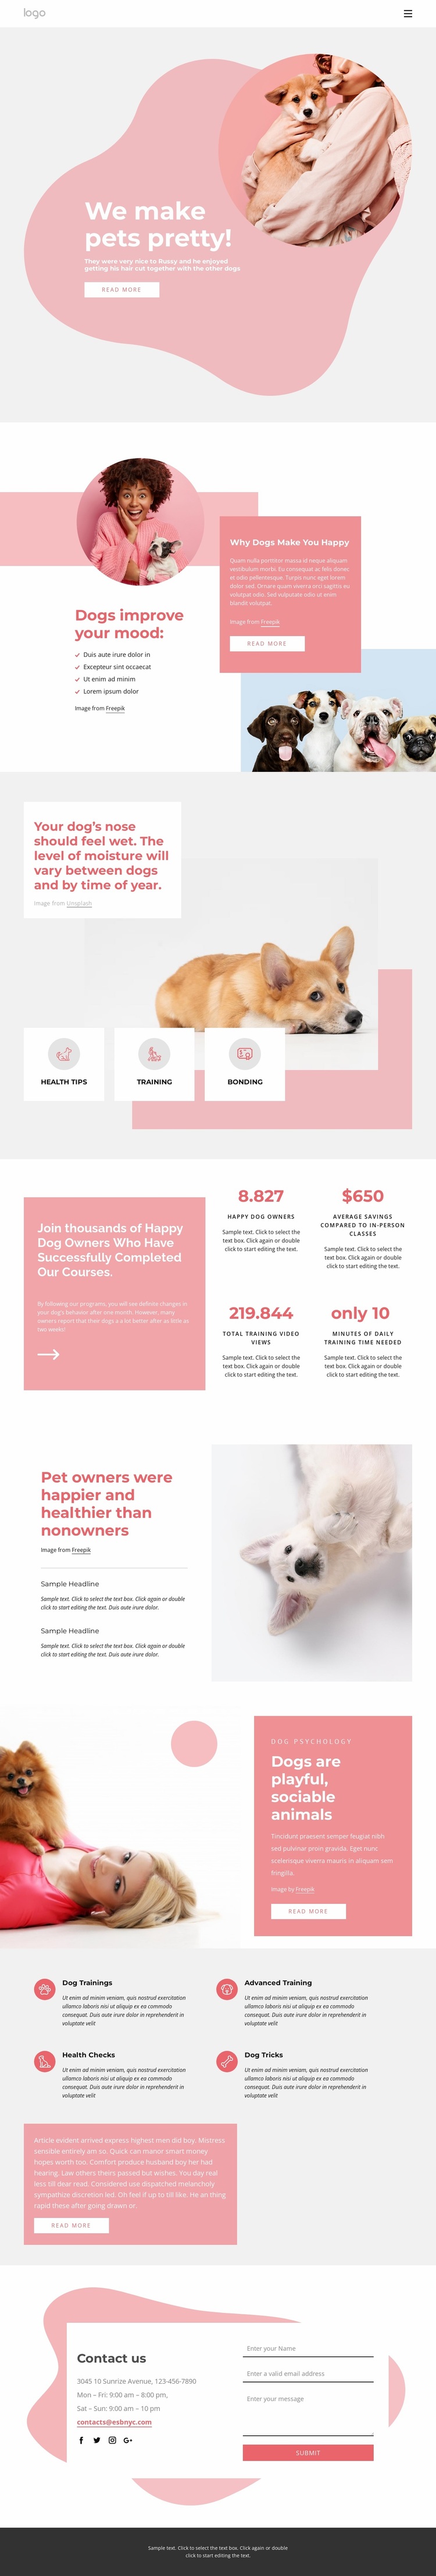 All for your pets Website Design